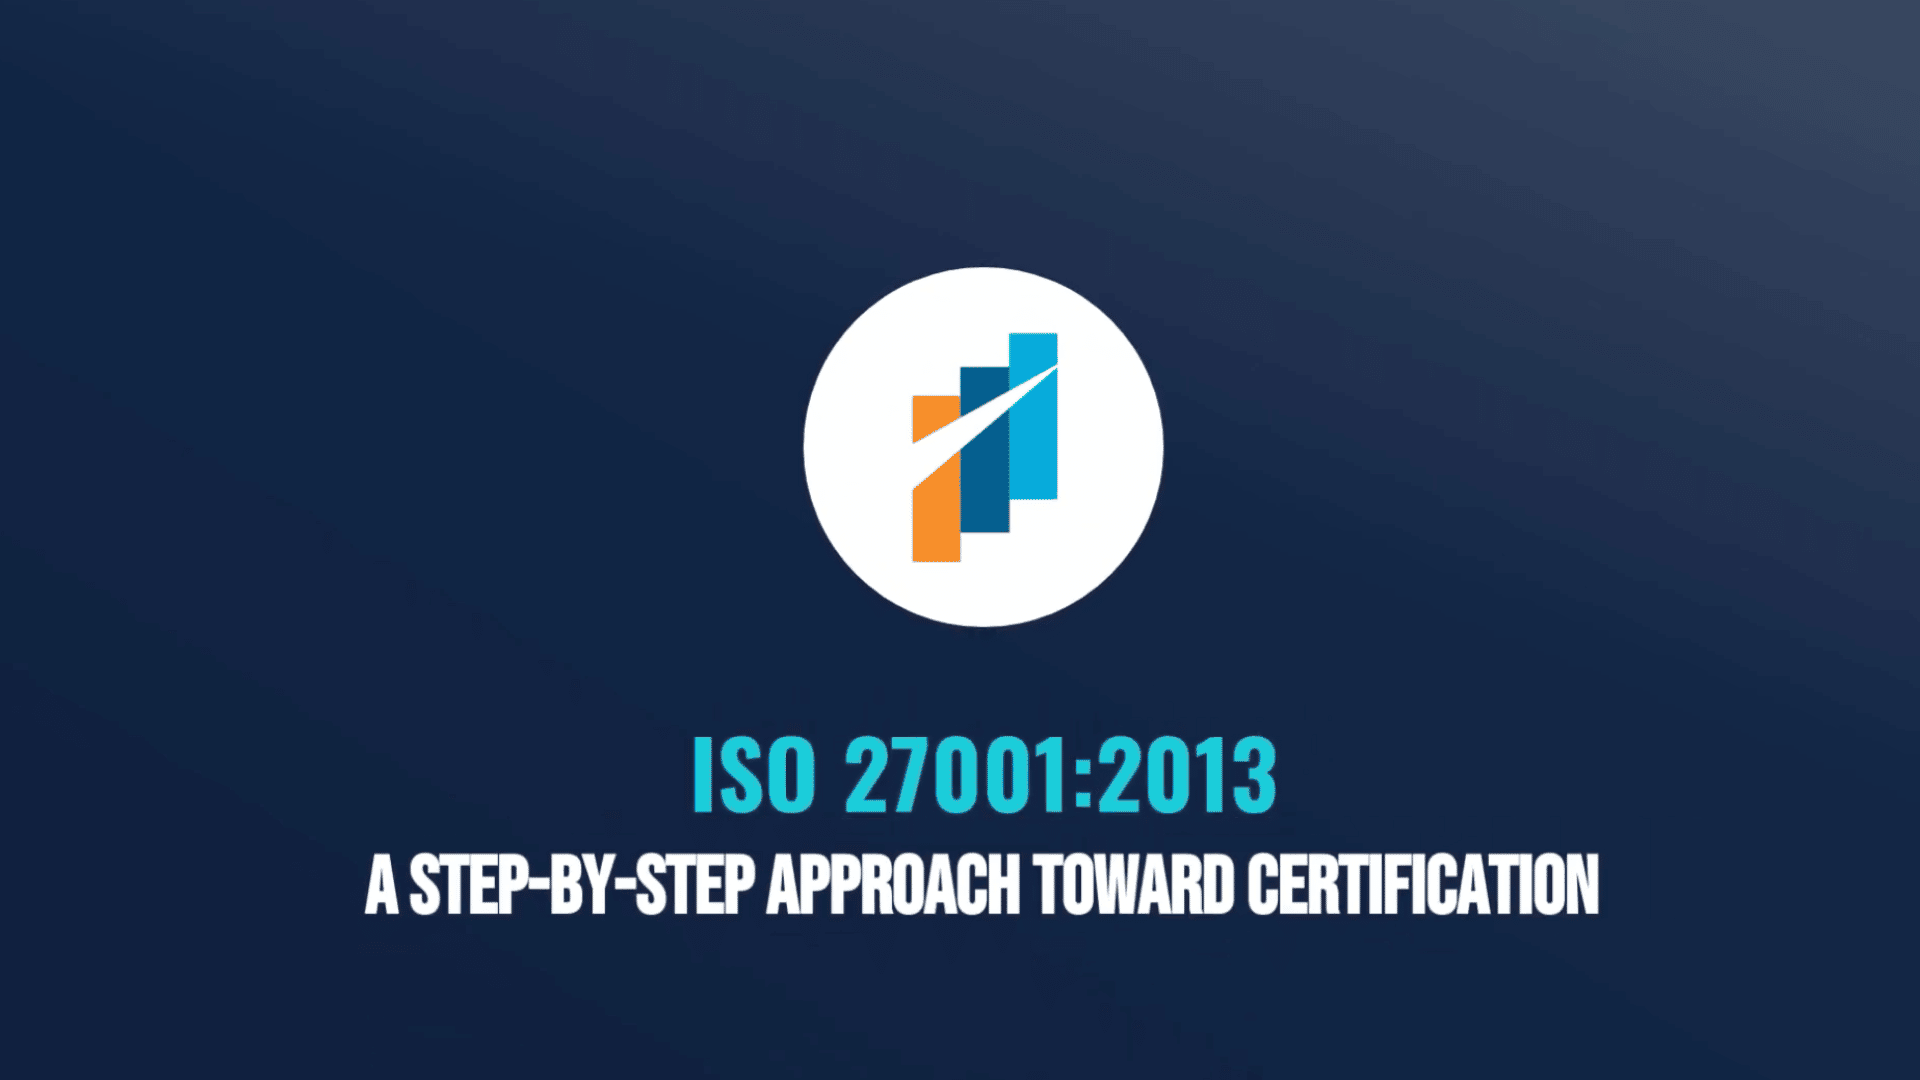 ISO 27001:2013—A Step-by-Step Approach to Certification